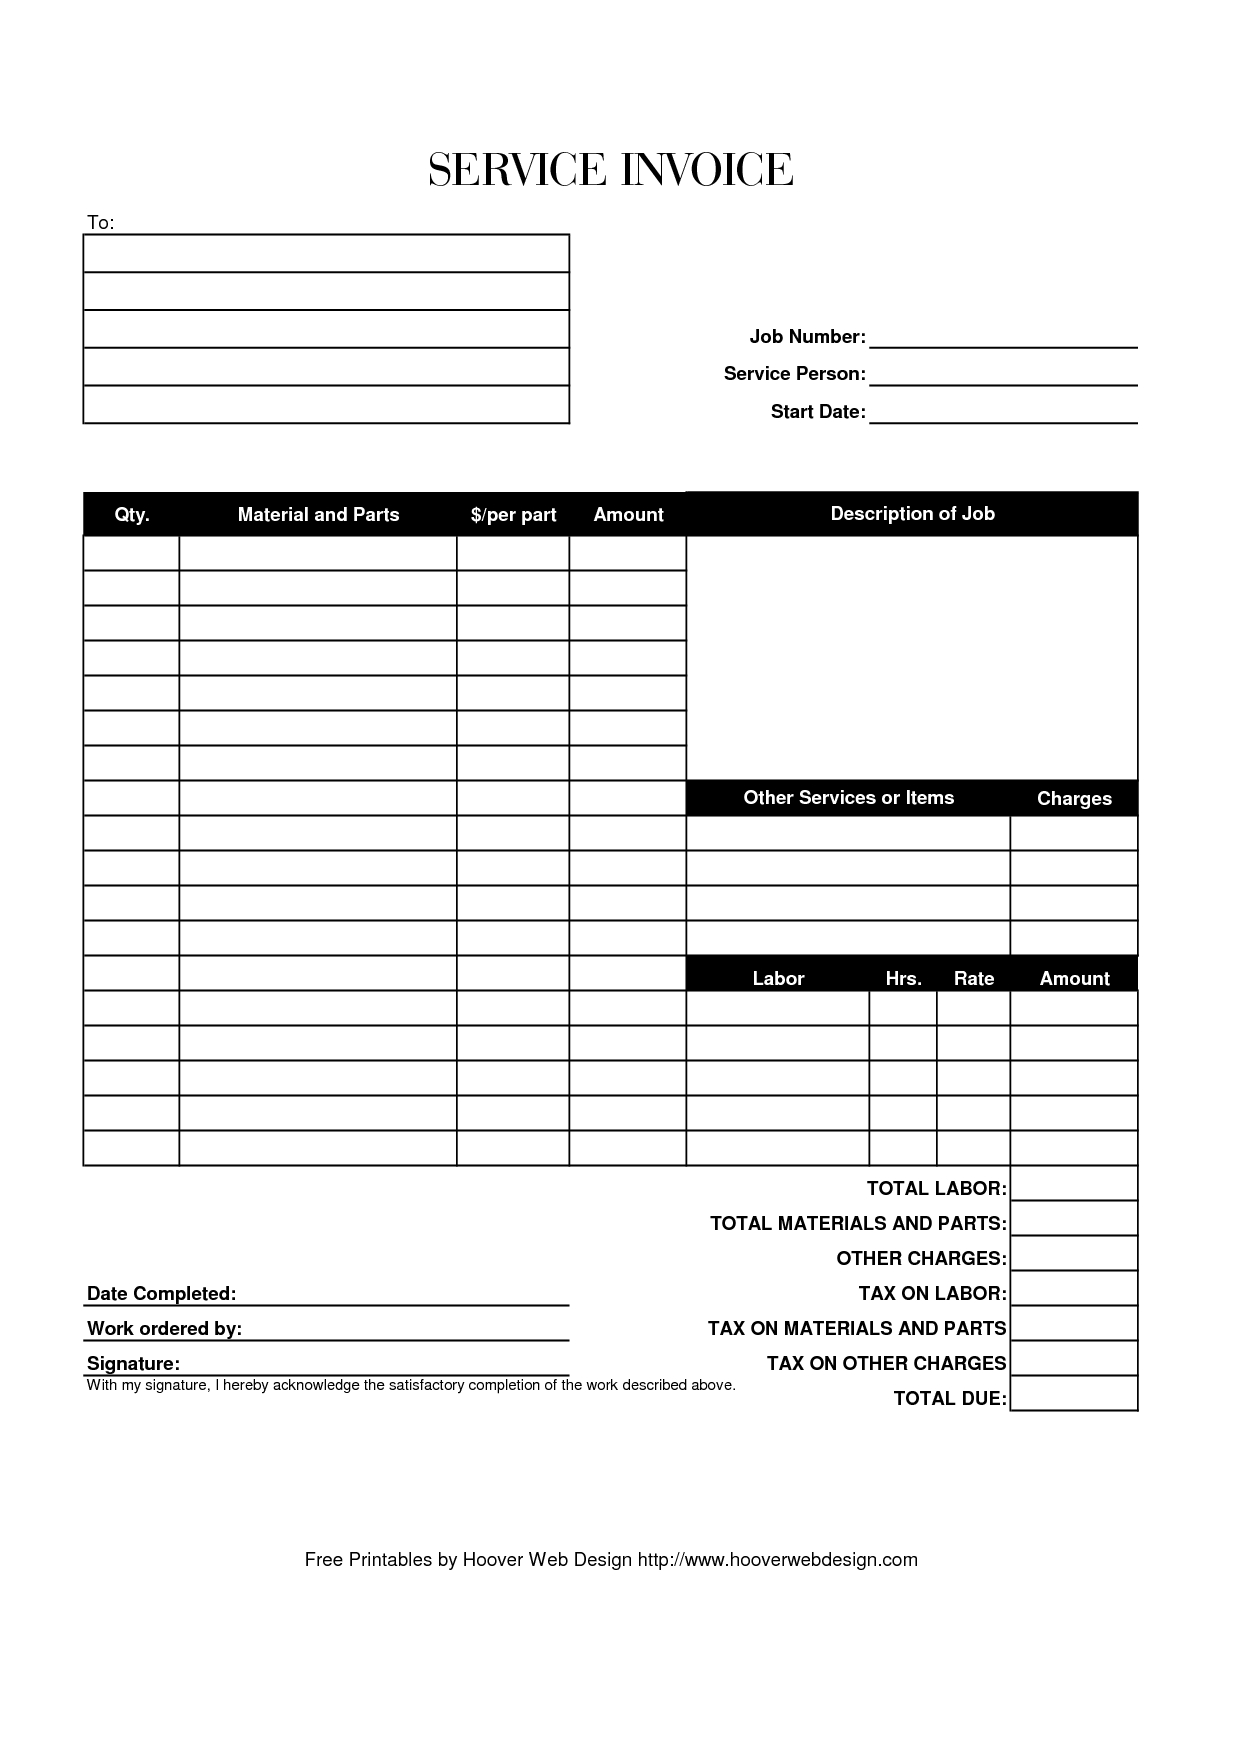 Hoover Receipts | Free Printable Service Invoice Template - Pdf - Free Printable Blank Receipt Form